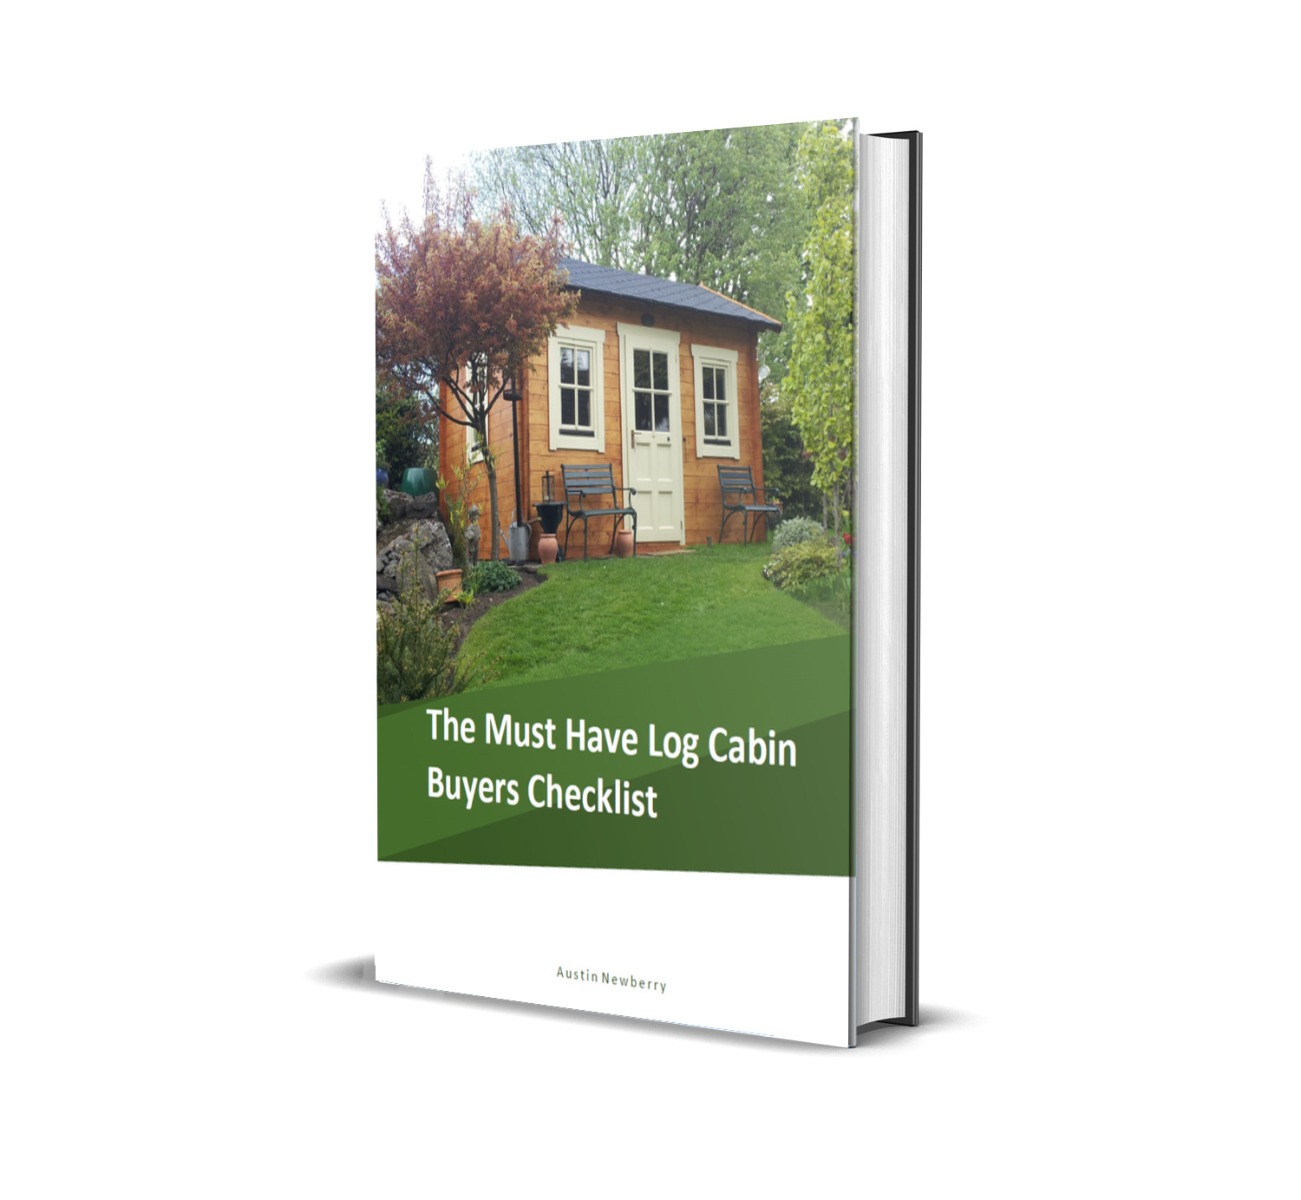 The Must Have Log Cabin Buyers Checklist